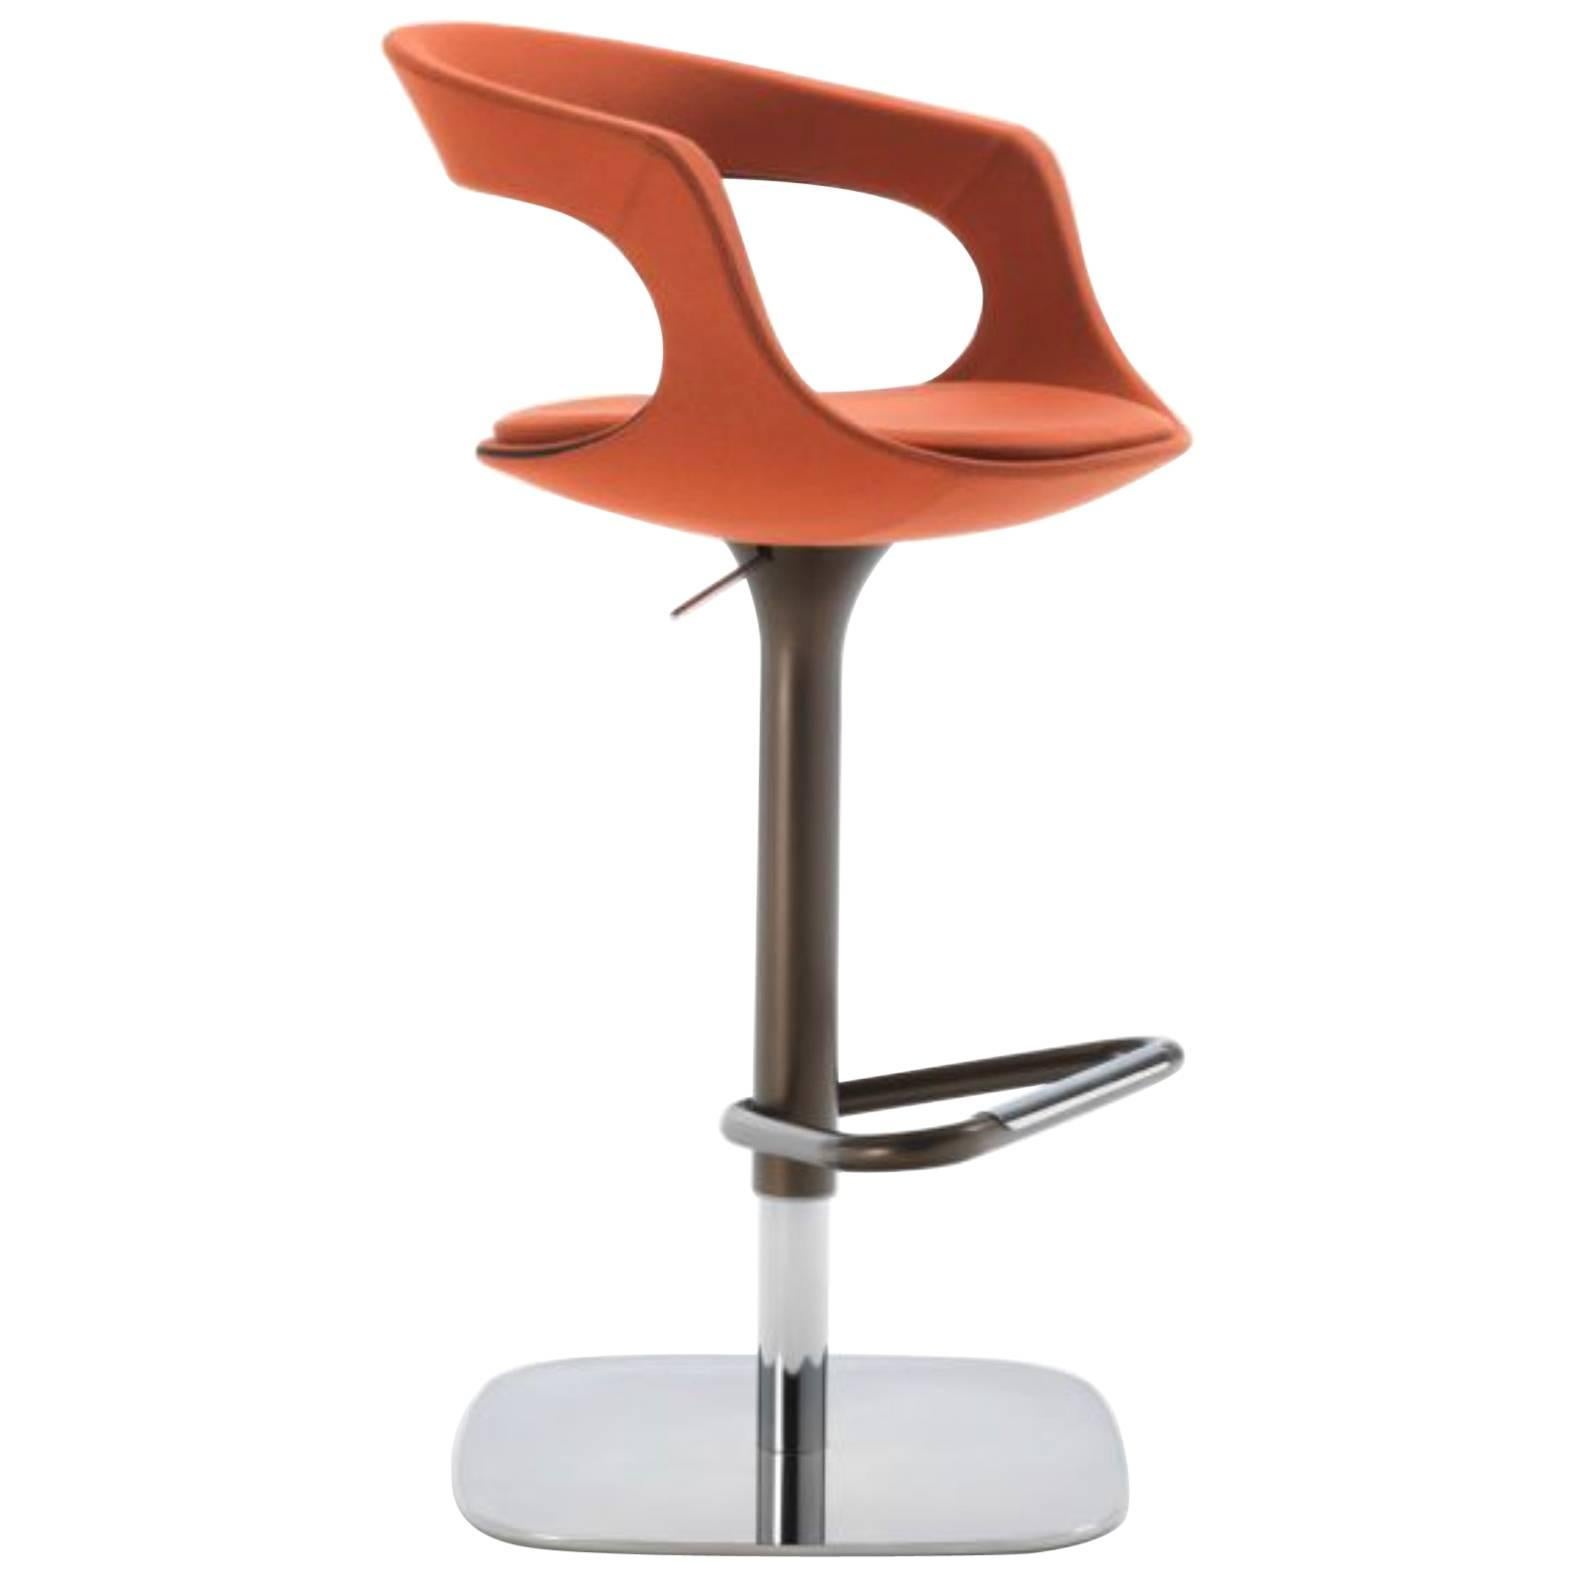 Modern Italian Bar or Counter Stool, Leather or Felt, Adjustable and Swivel For Sale